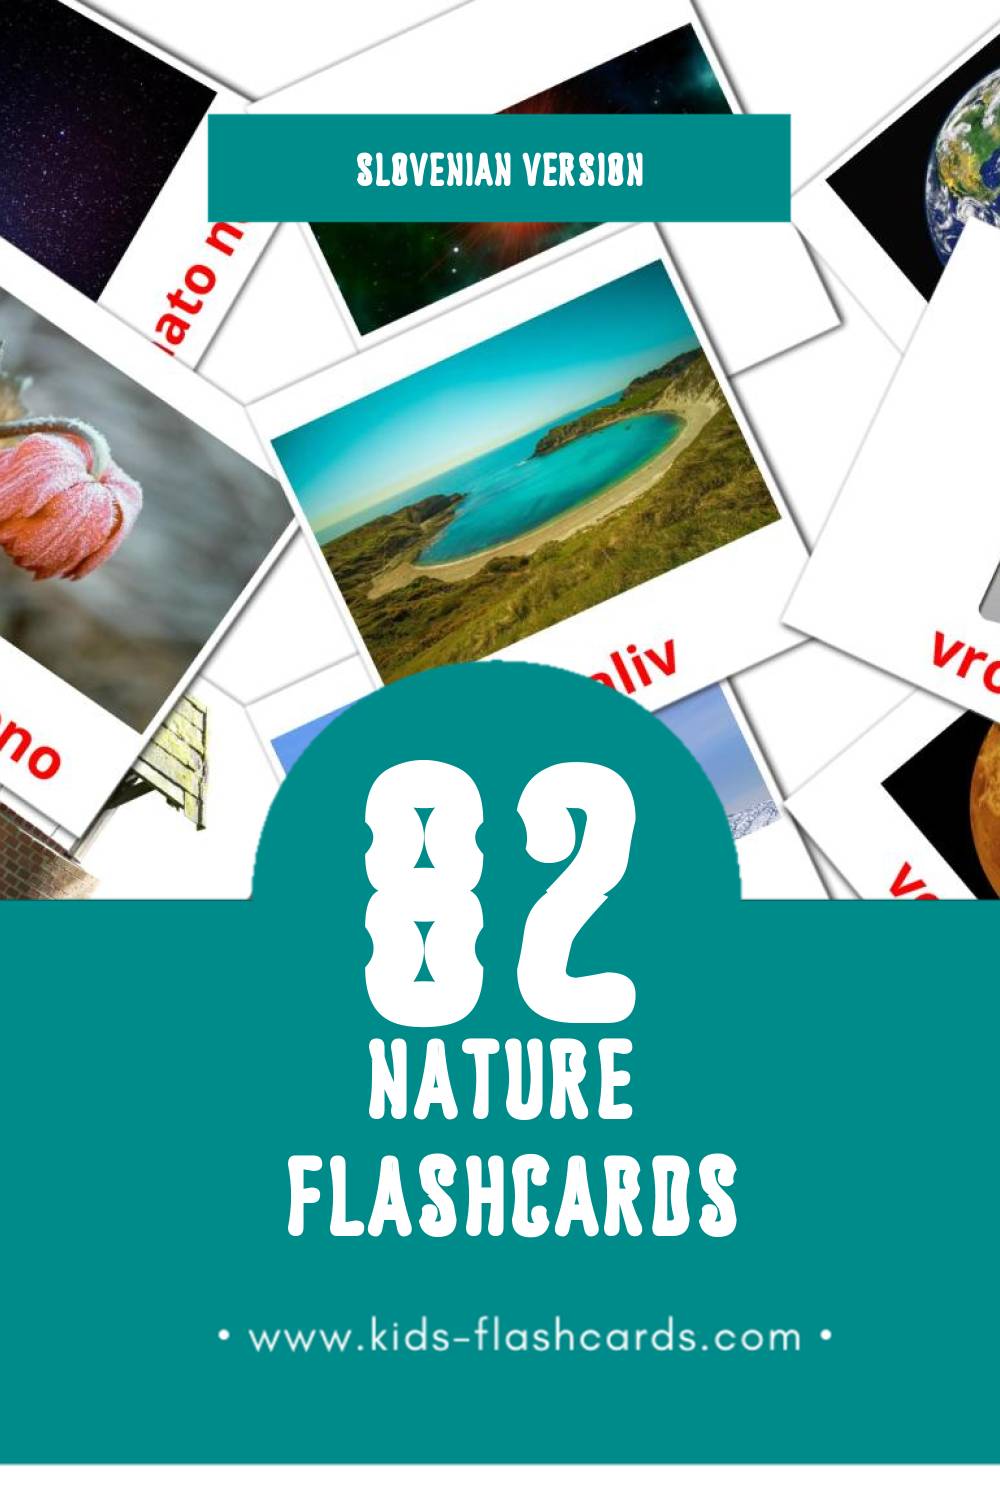 Visual Narava Flashcards for Toddlers (82 cards in Slovenian)